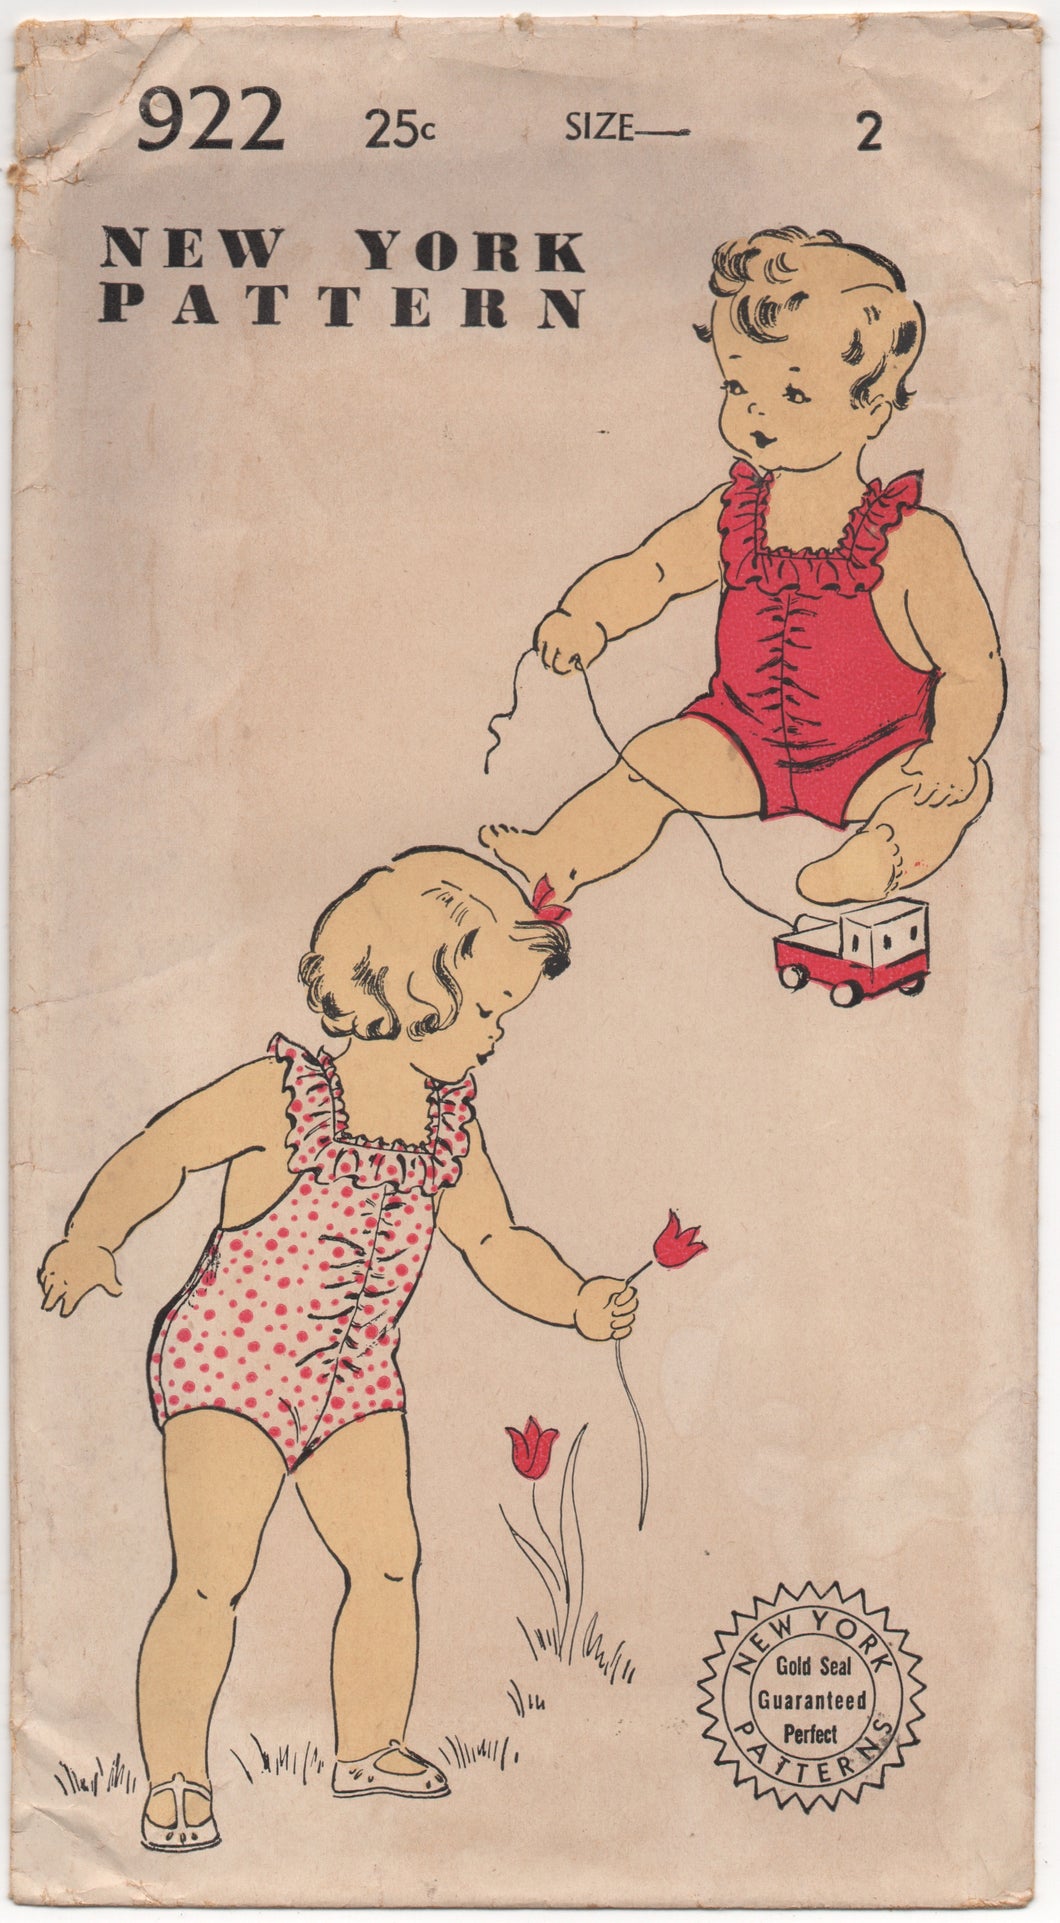 1940's New York Child's Swimsuit with gathered front and ruffle straps - Size 2 - No. 922